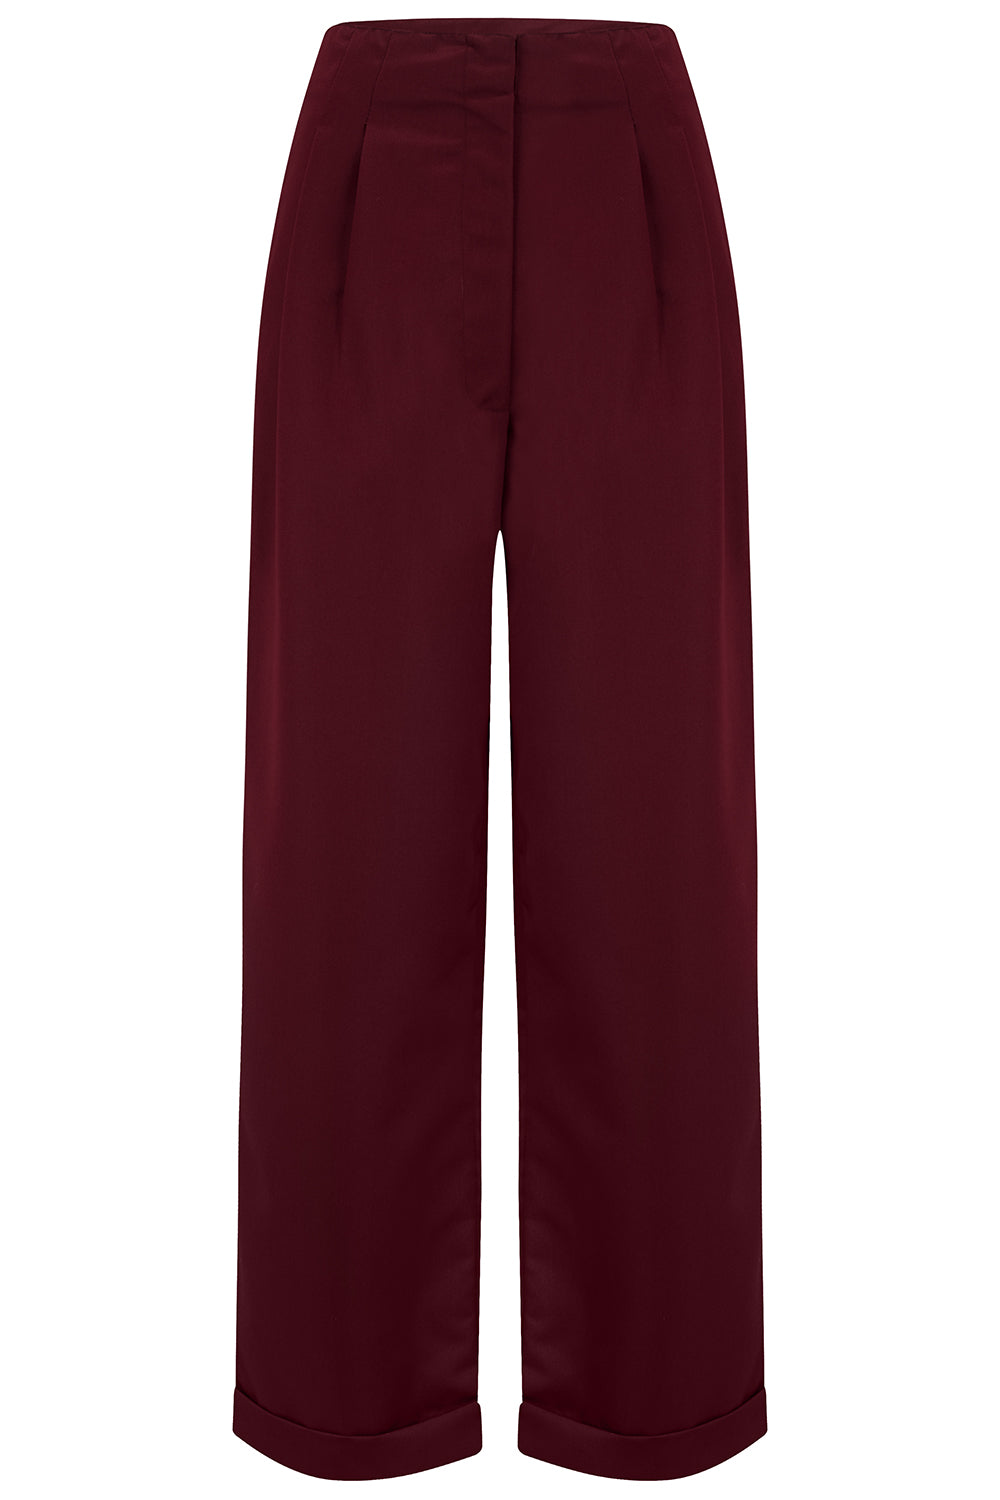 Tailored Audrey Trousers Stone  Vintage 1940s Style Women's